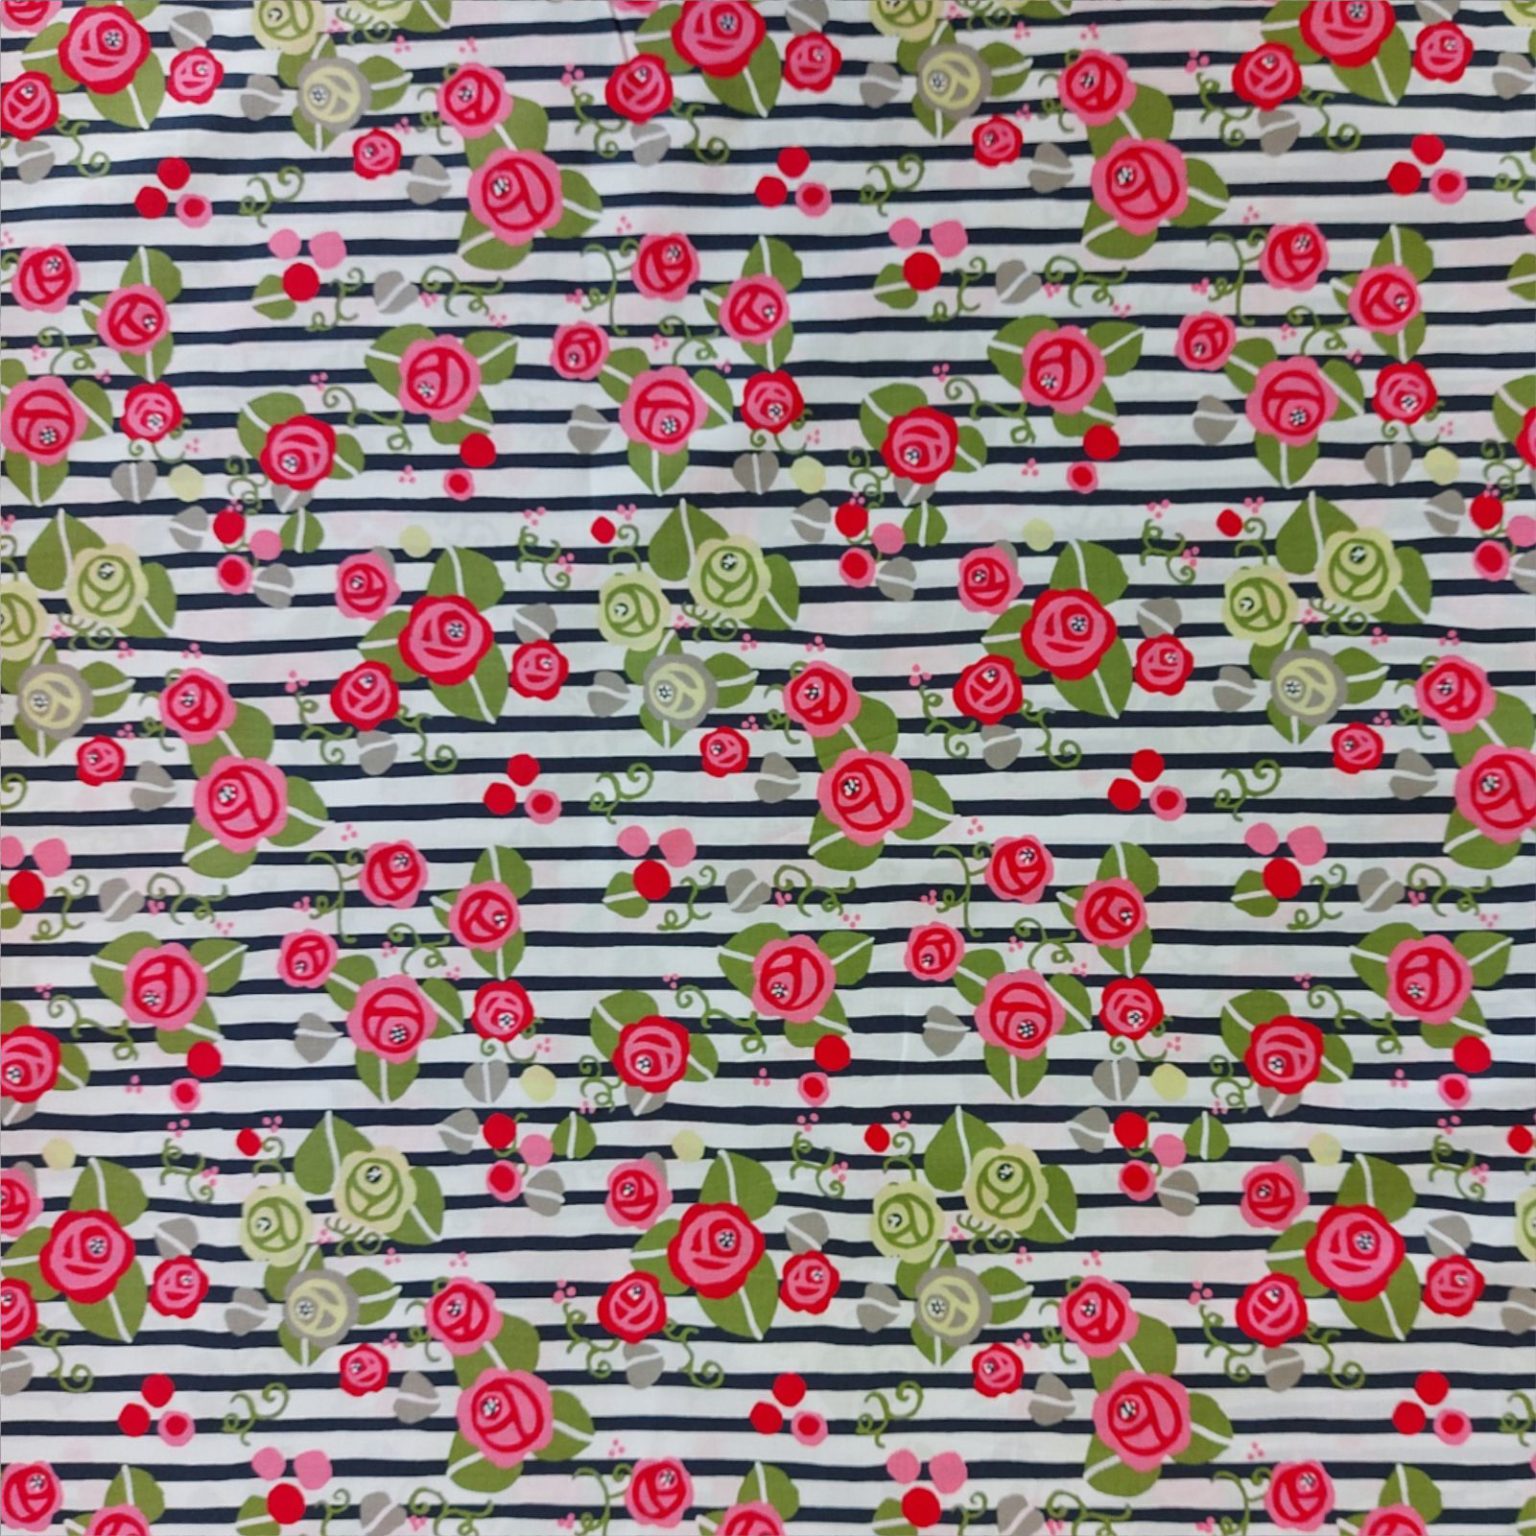 Dressmaking Fabric | Barge Roses Pima Cotton Lawn | More Sewing